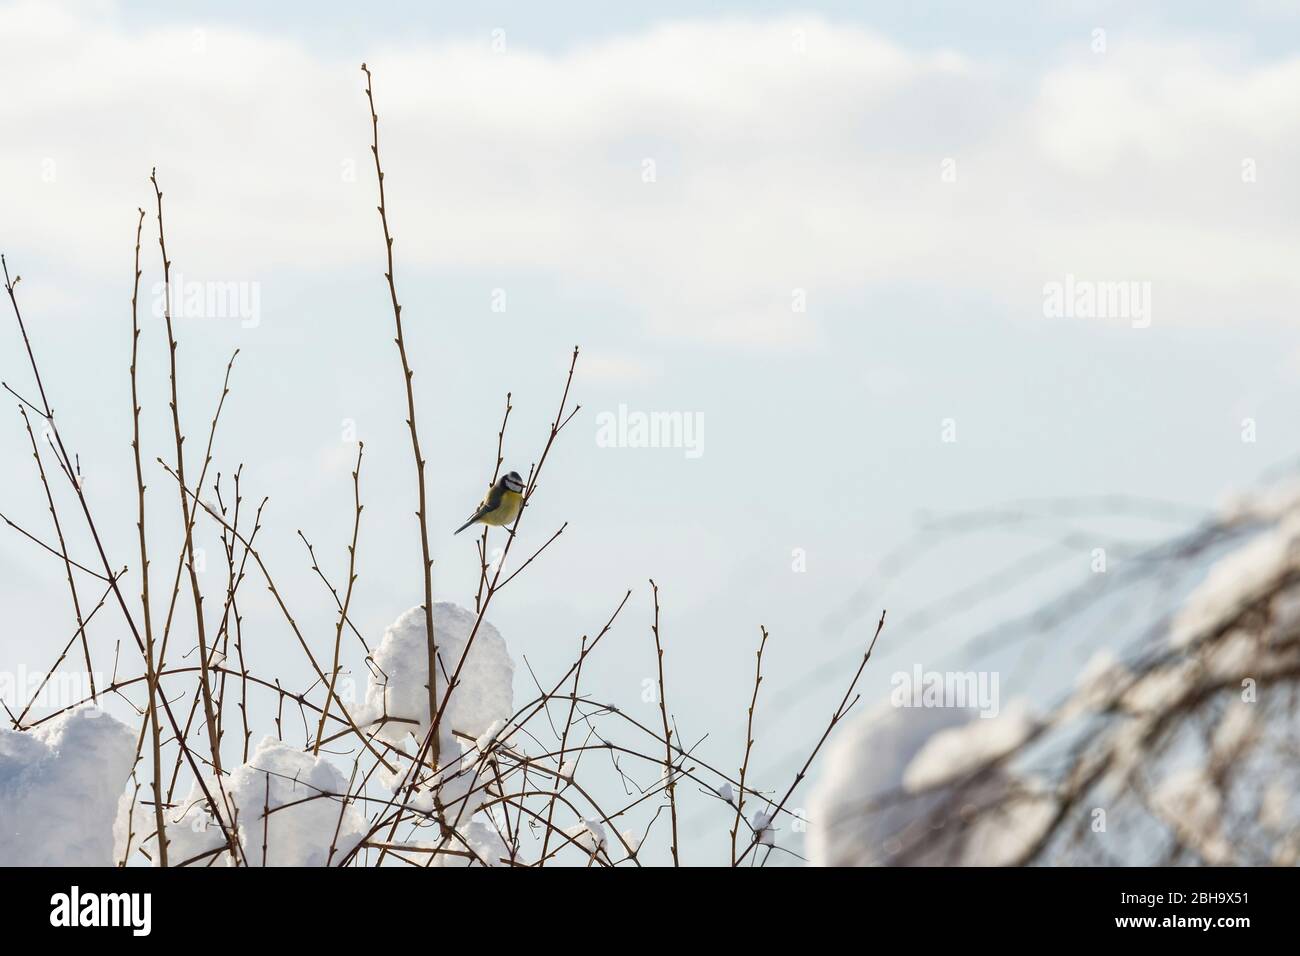 A titmouse on a branch of a tree in winter. Stock Photo